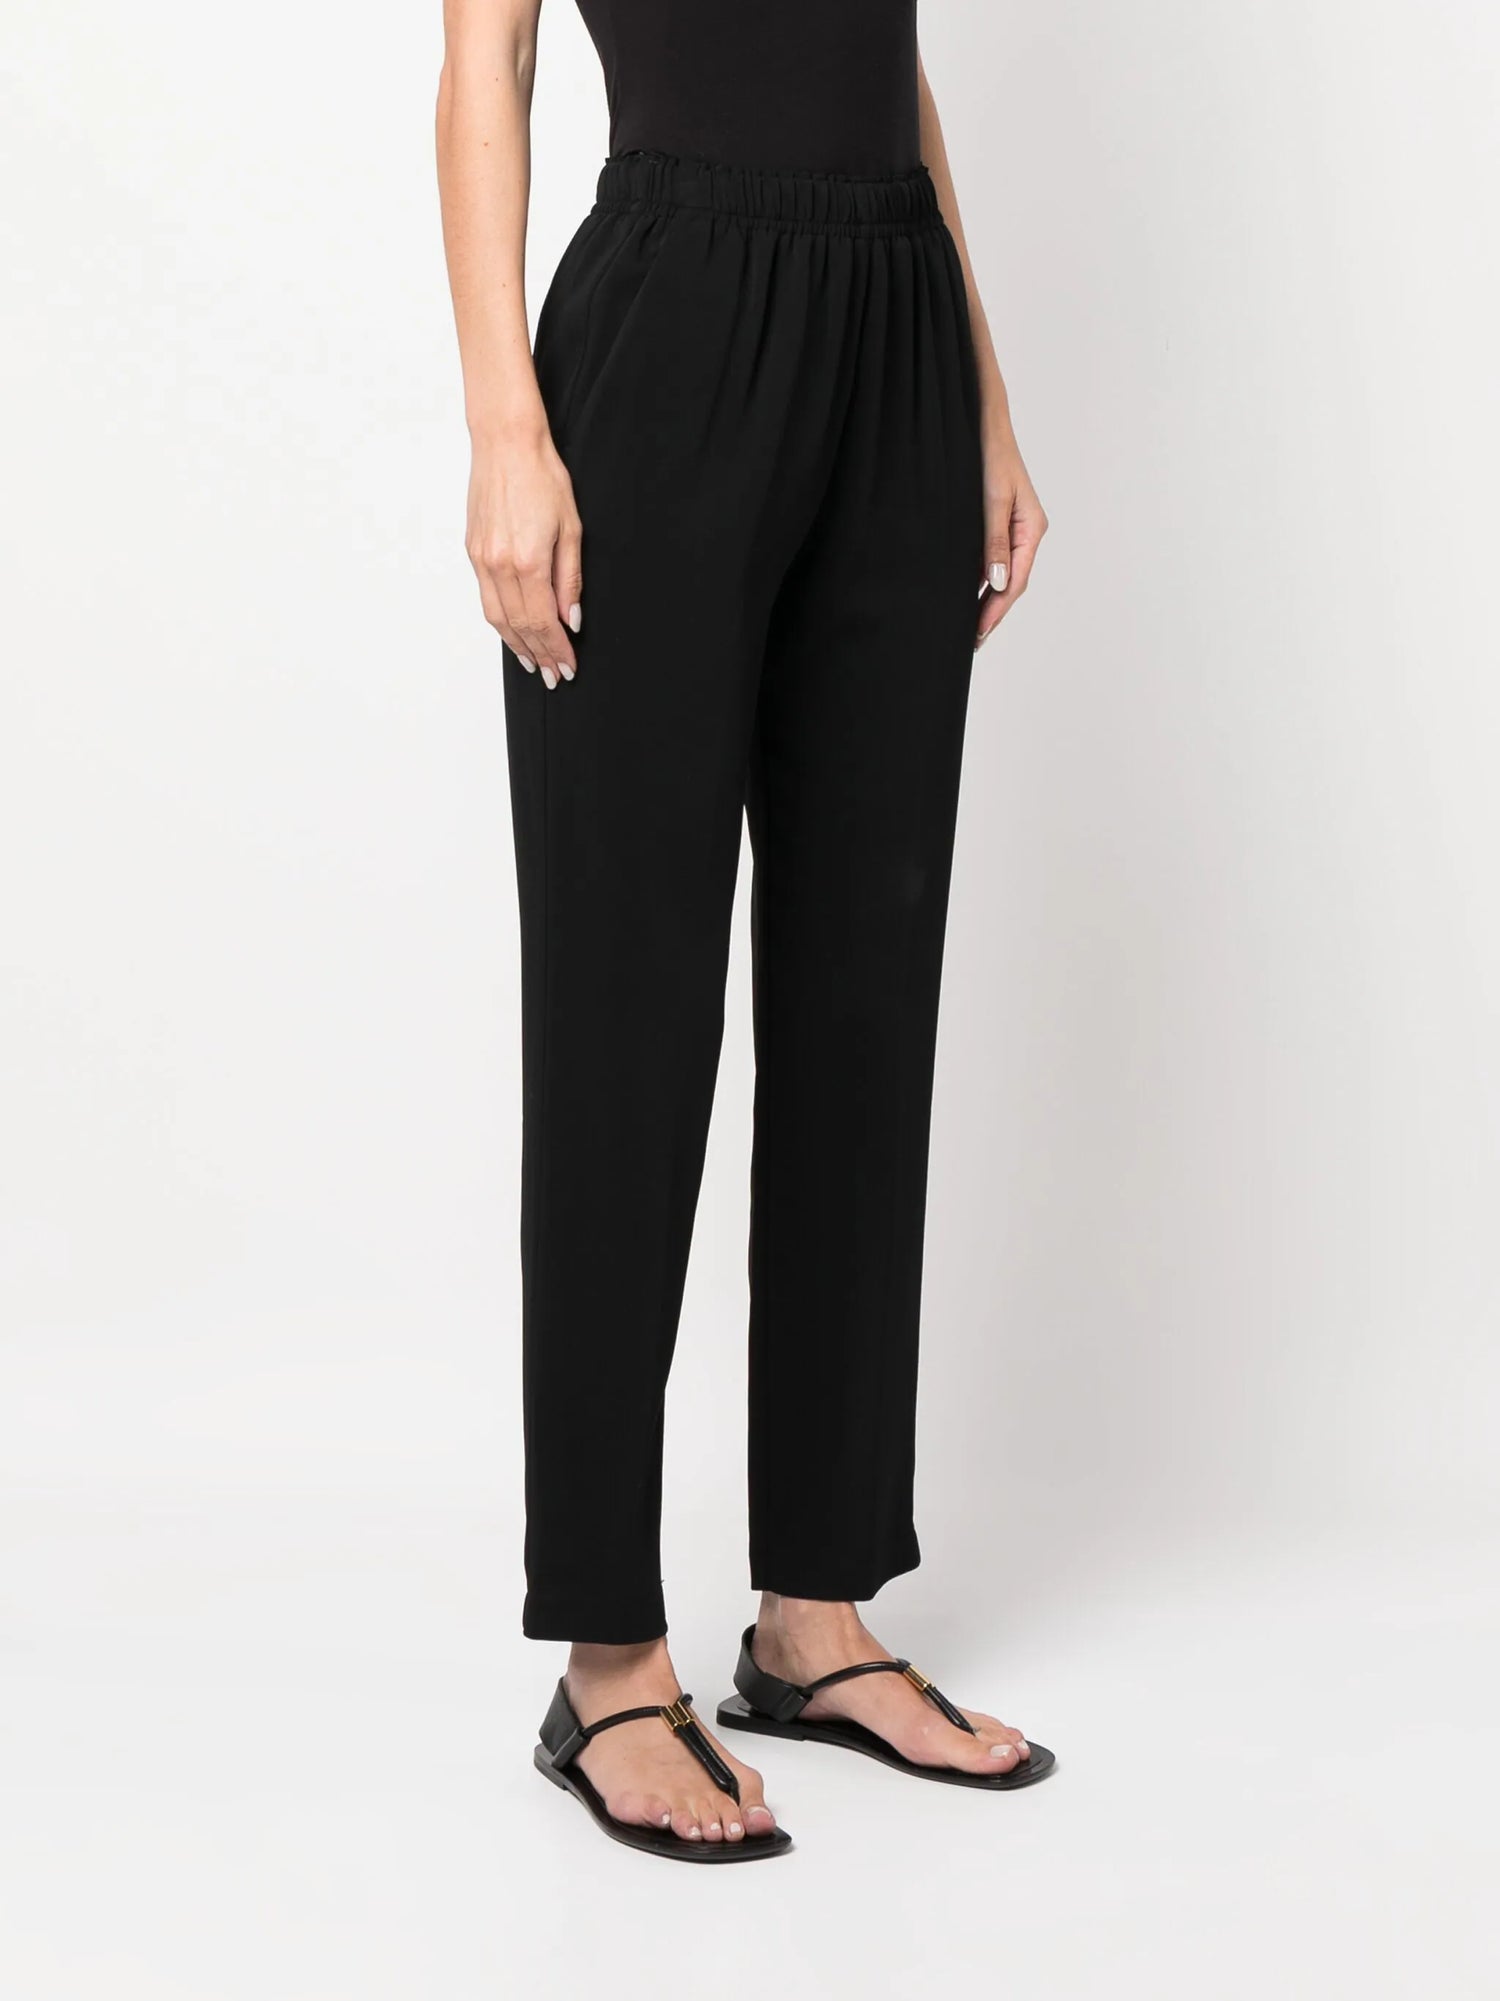 FORTE-FORTE: Stretch crepe cady jogger pants, black – My o My